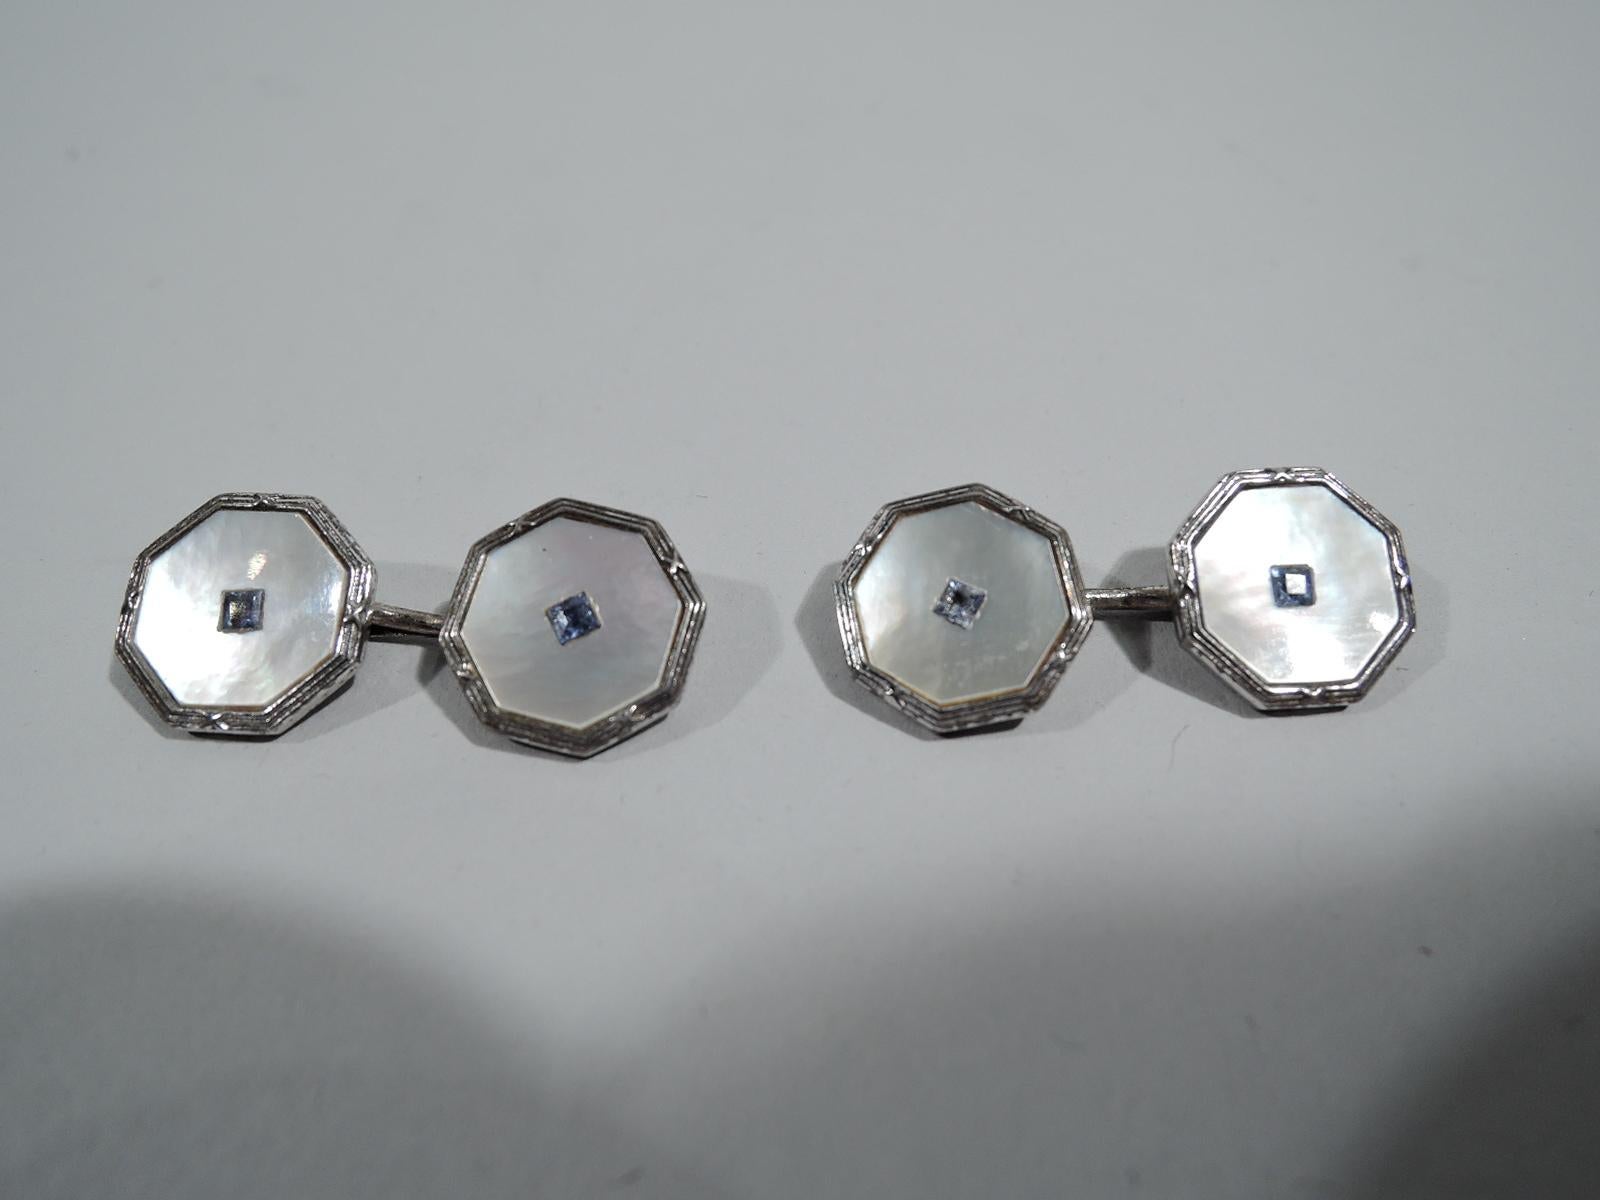 Square Cut Antique American Mother-of-Pearl & Sapphire Cufflink Stud Button Set